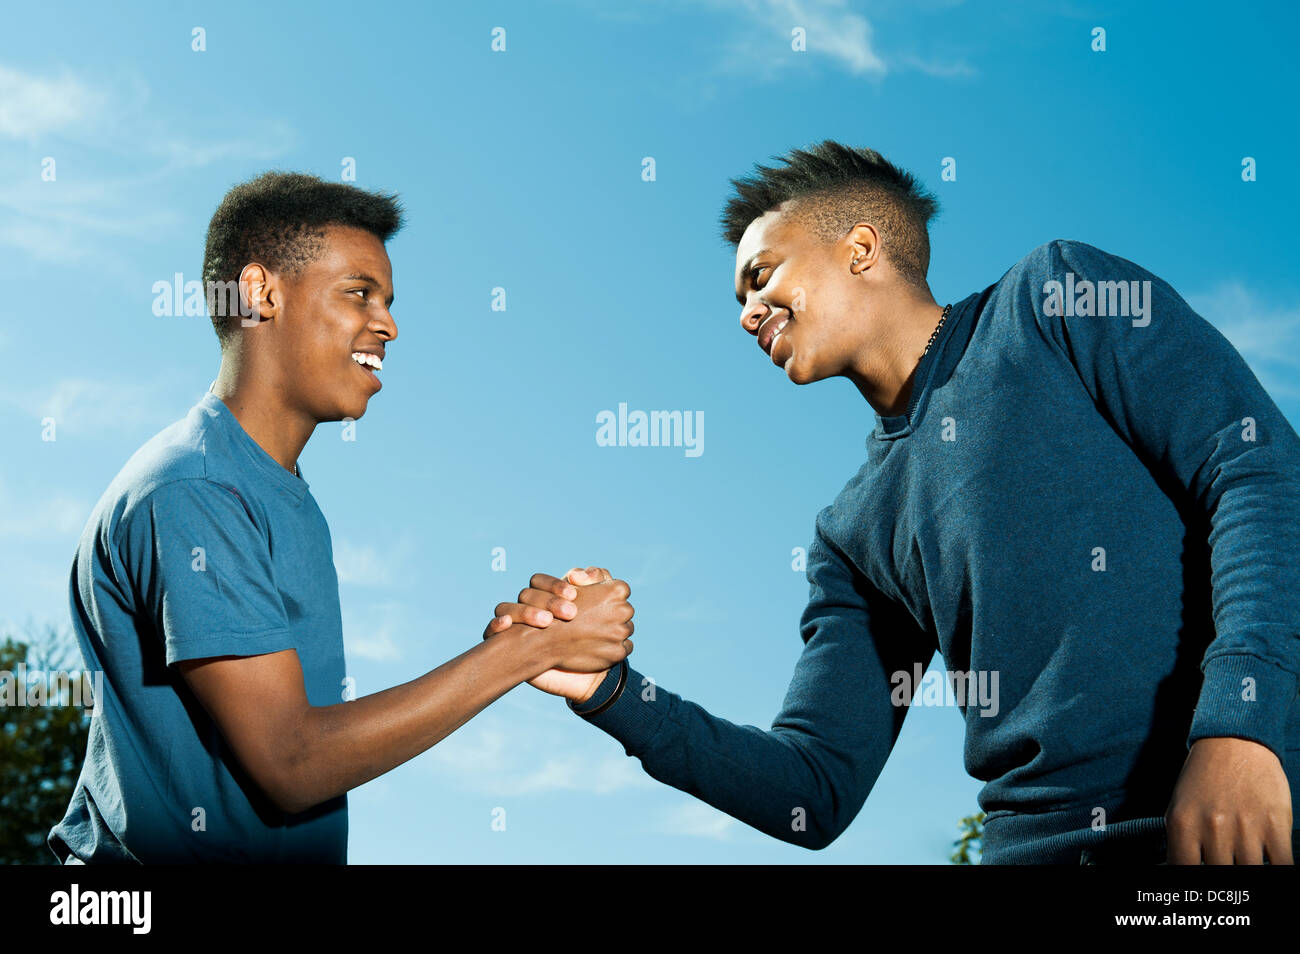 Friends greeting each other Stock Photo